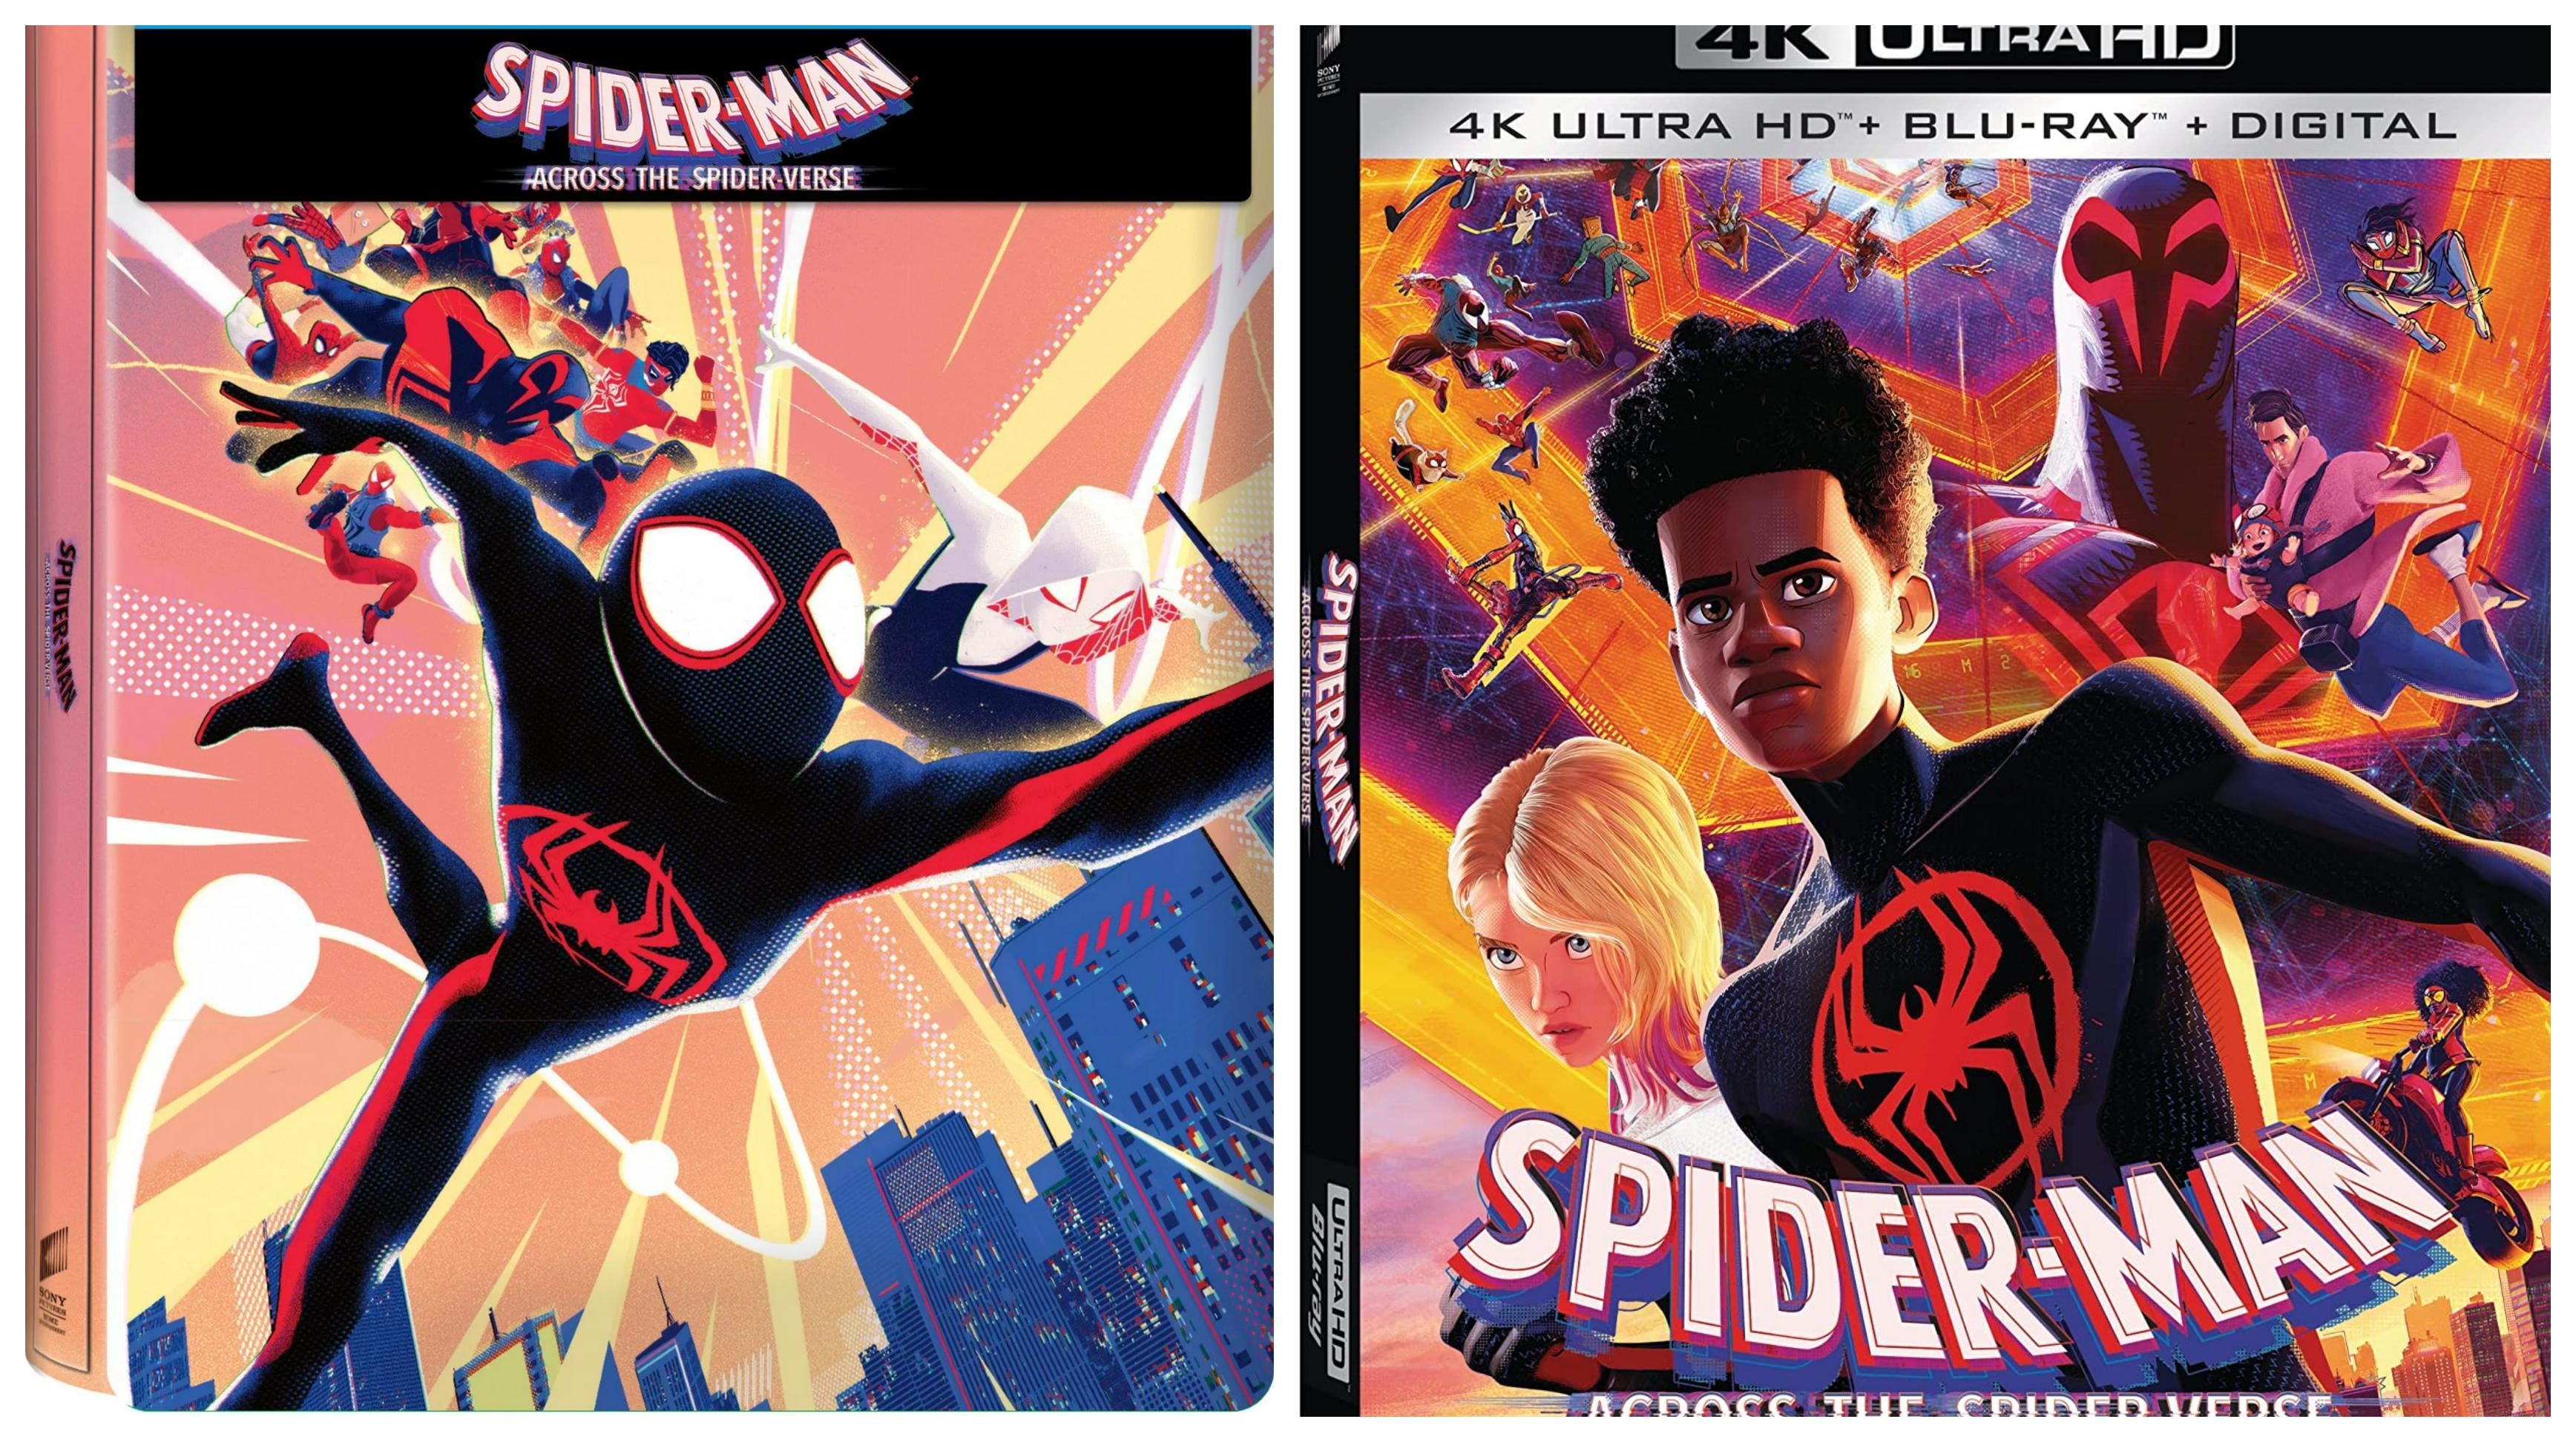 Spider-Man: Across the Spider-Verse' to release on this date in